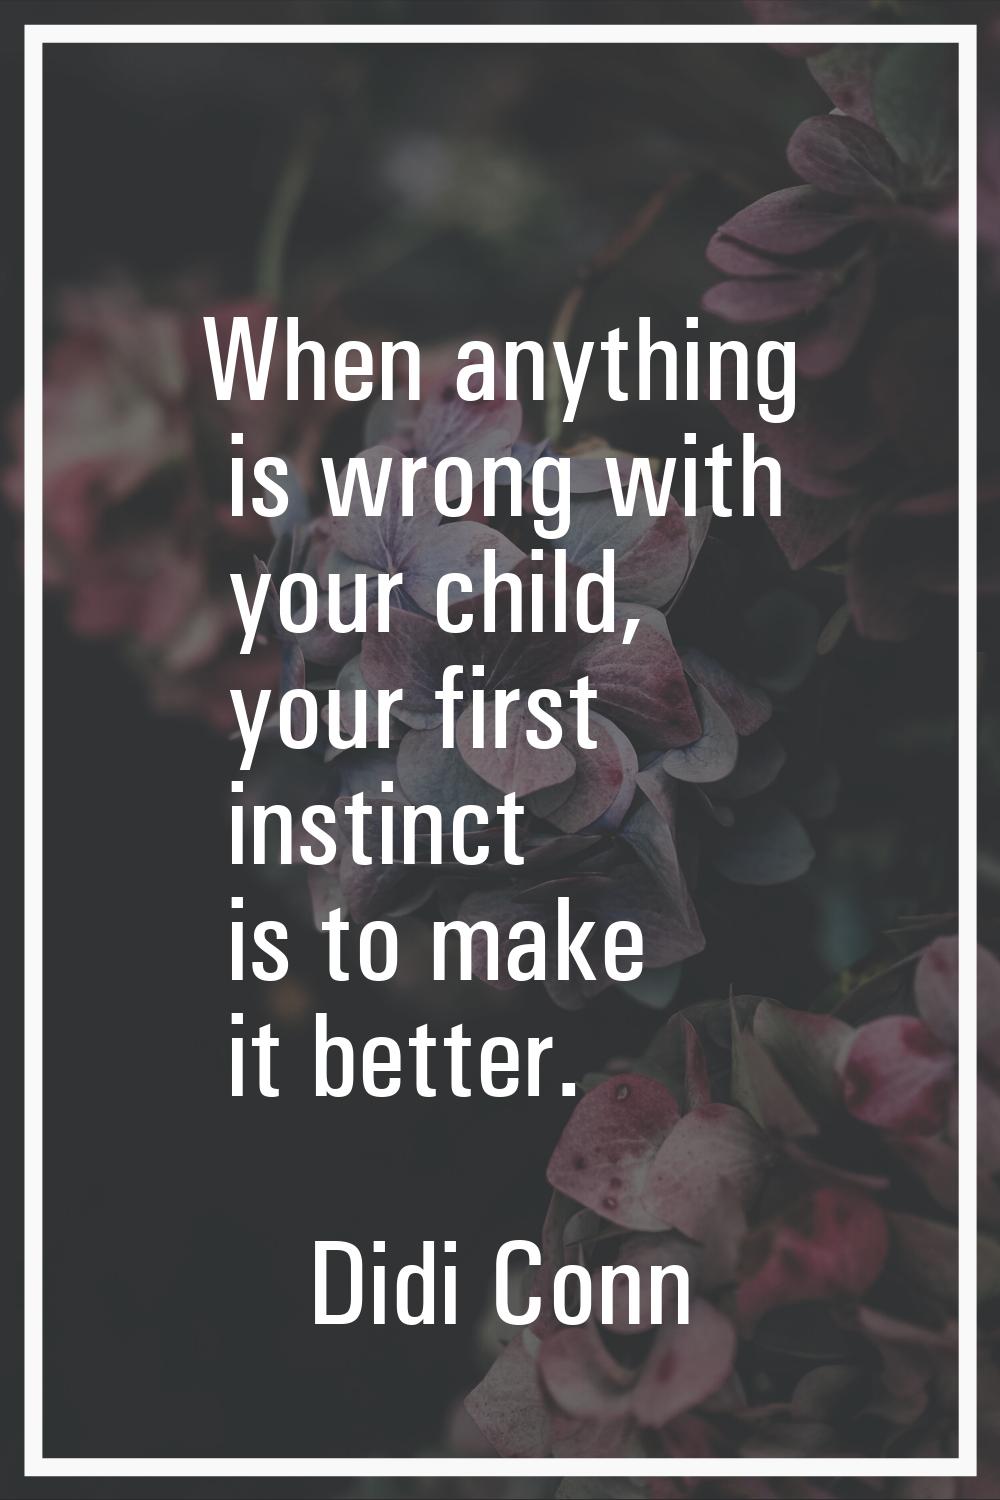 When anything is wrong with your child, your first instinct is to make it better.